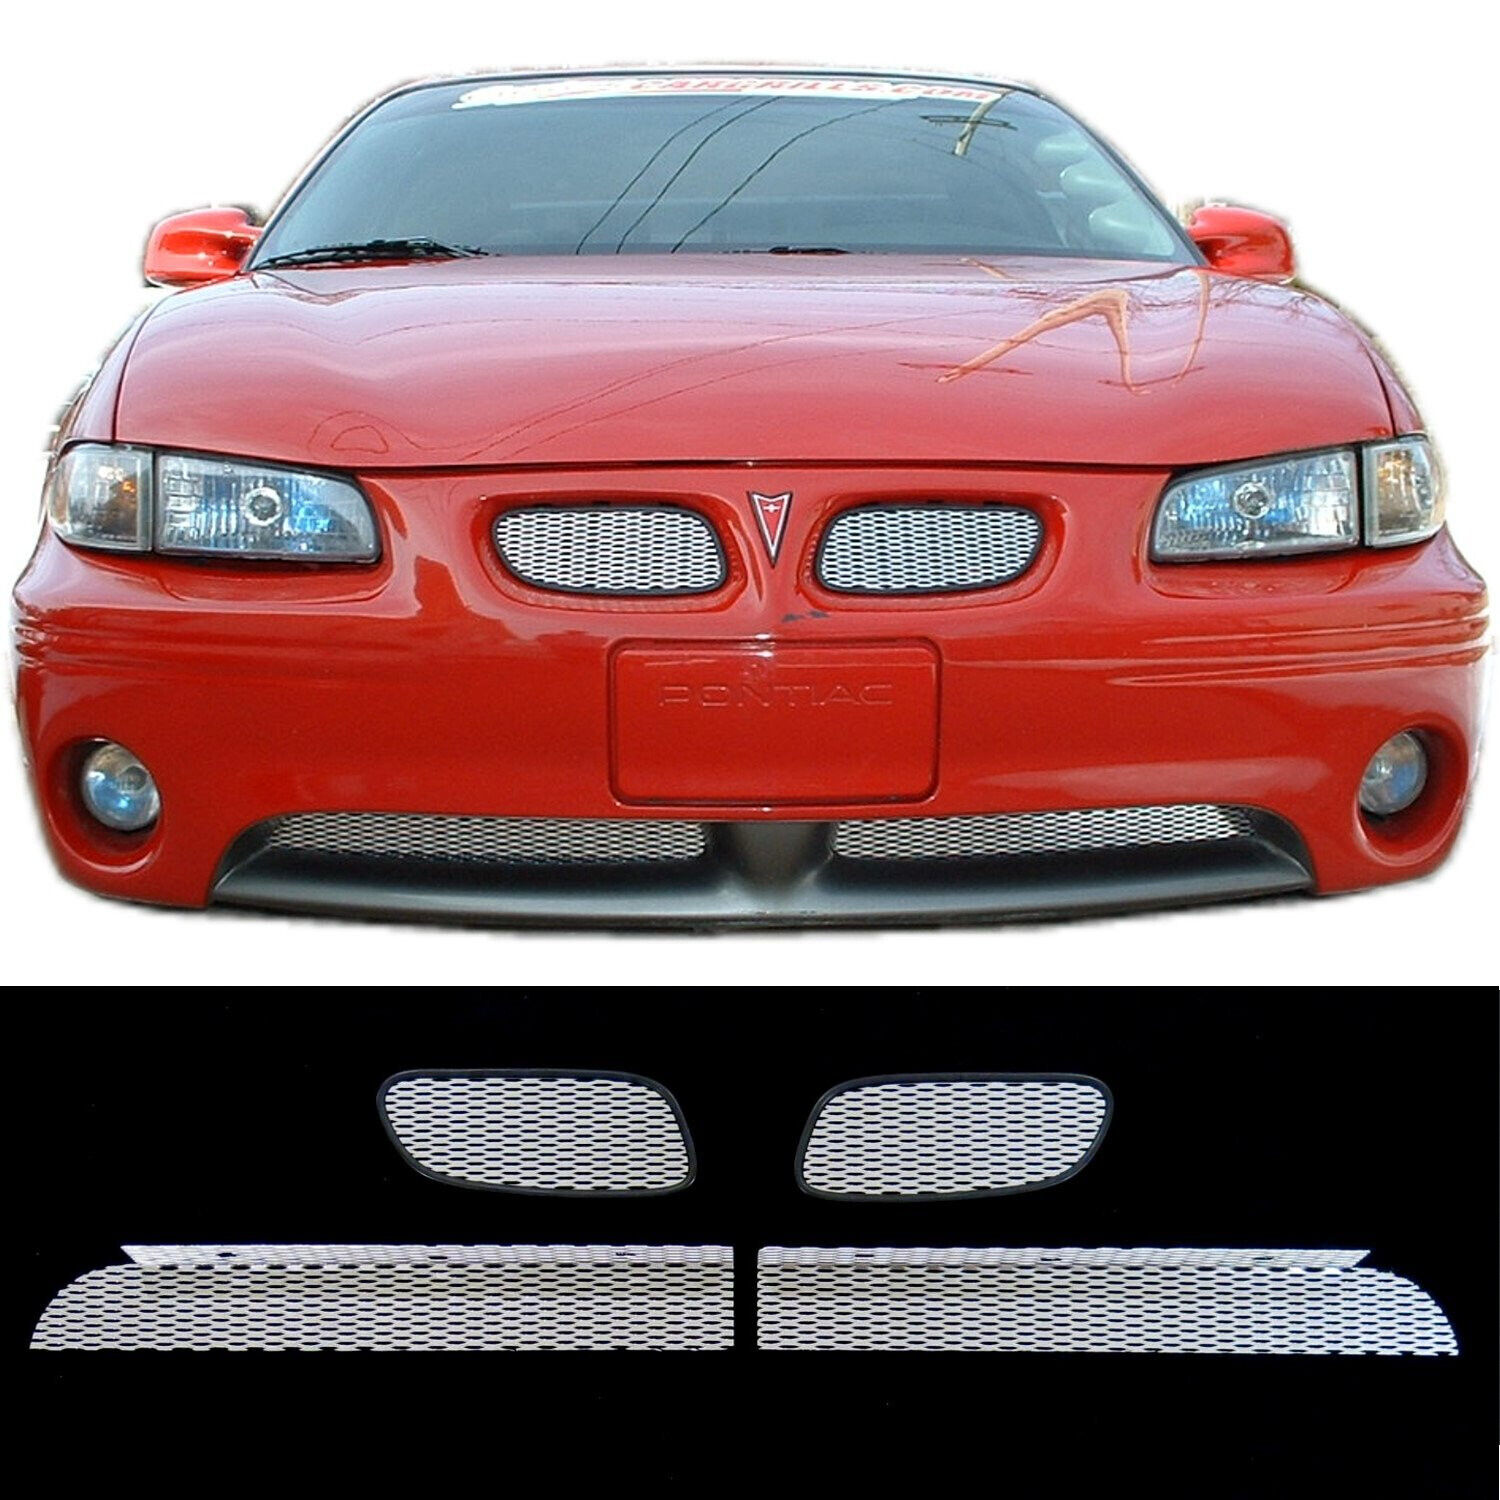 CCG MESH GRILL INSERTS FOR 1997-03 GRAND PRIX GT GTP GRILLE DIAMOND EXTREME 4PC